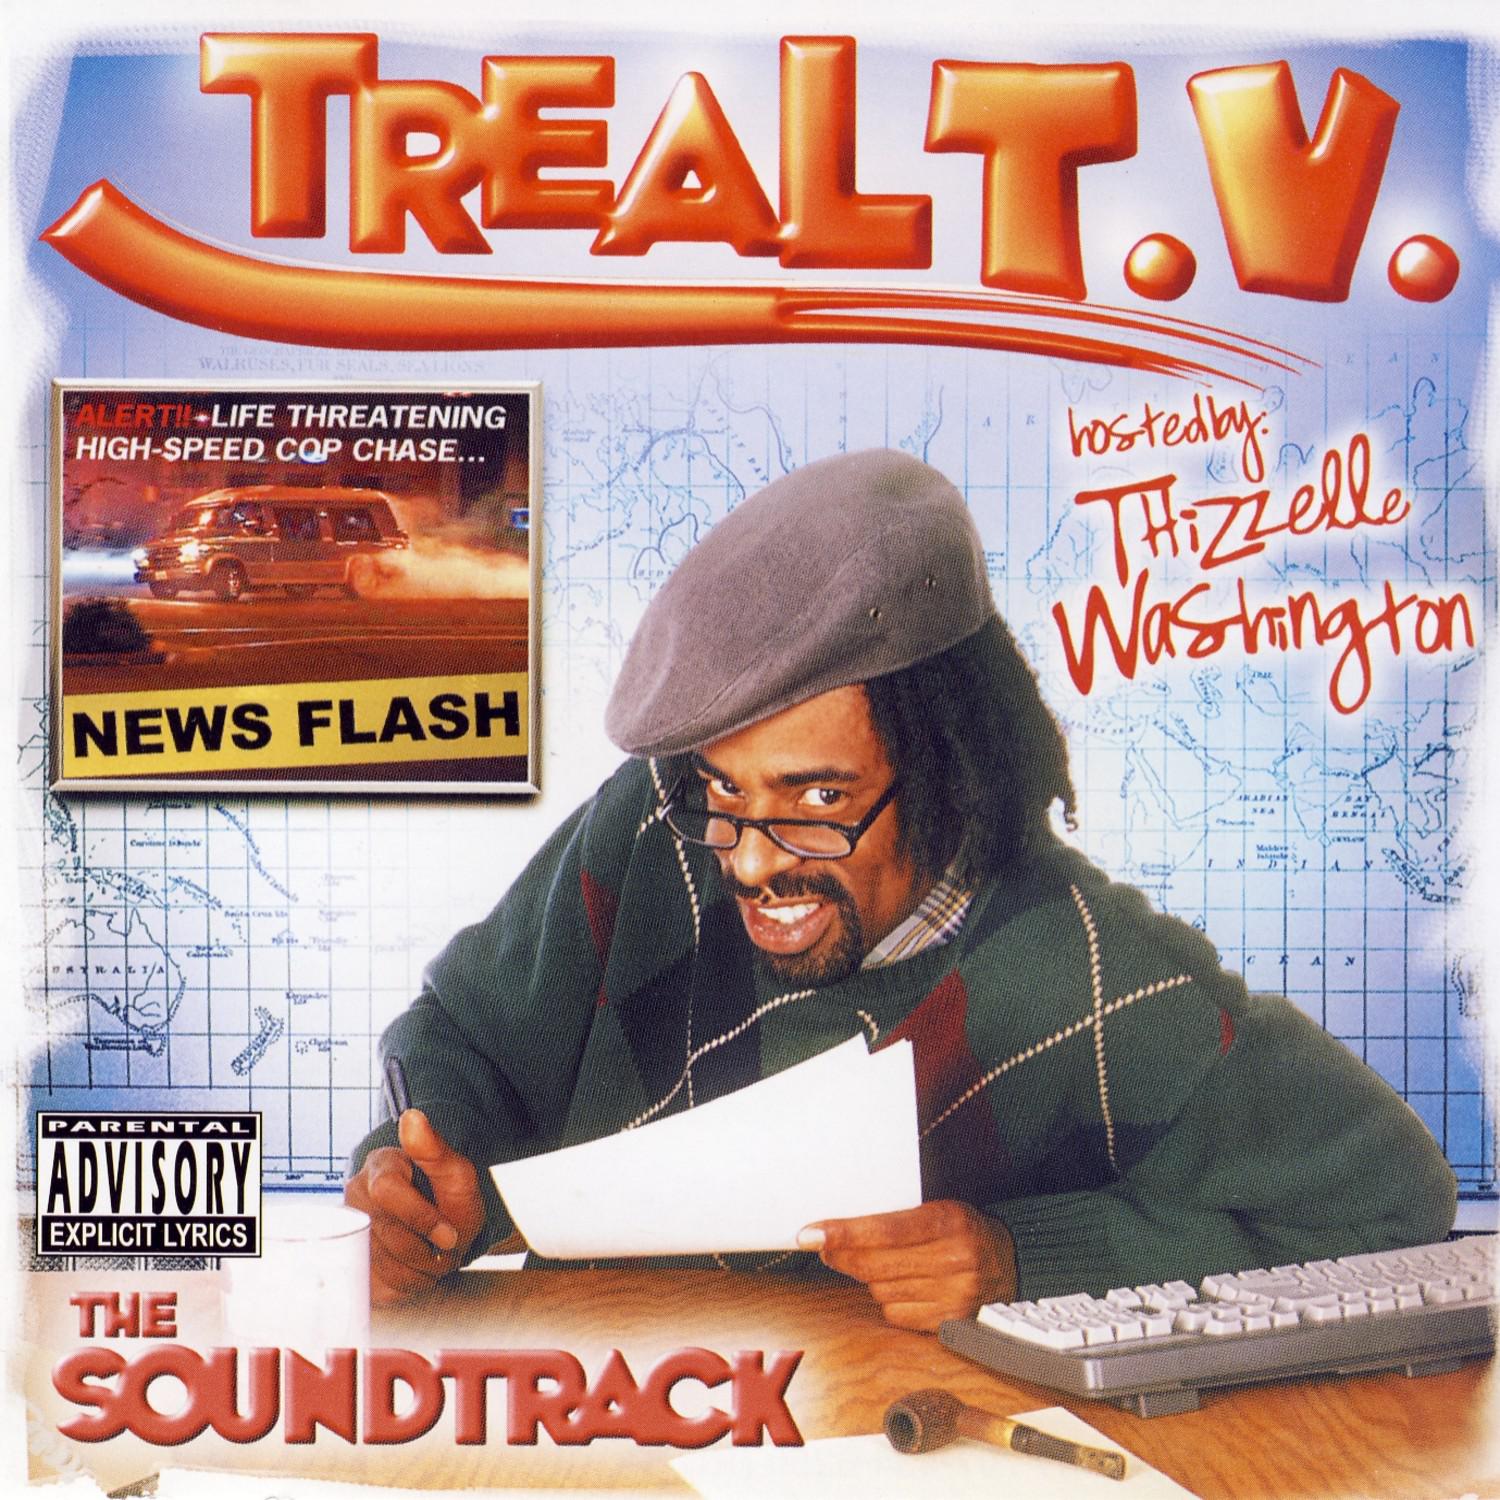 The Treal TV Soundtrack